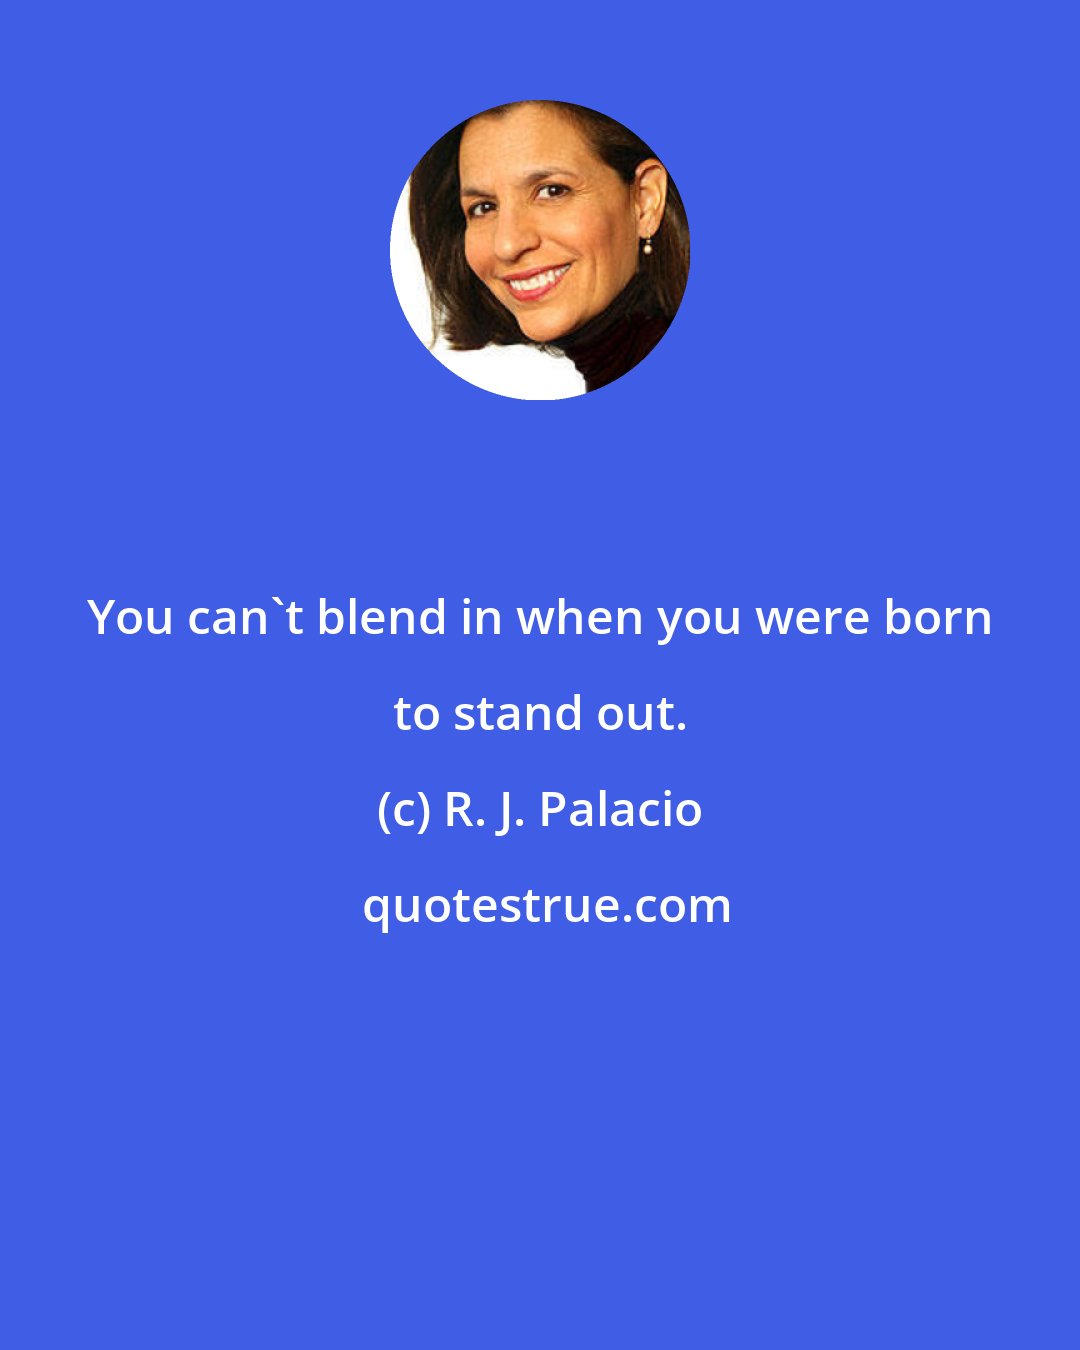 R. J. Palacio: You can't blend in when you were born to stand out.